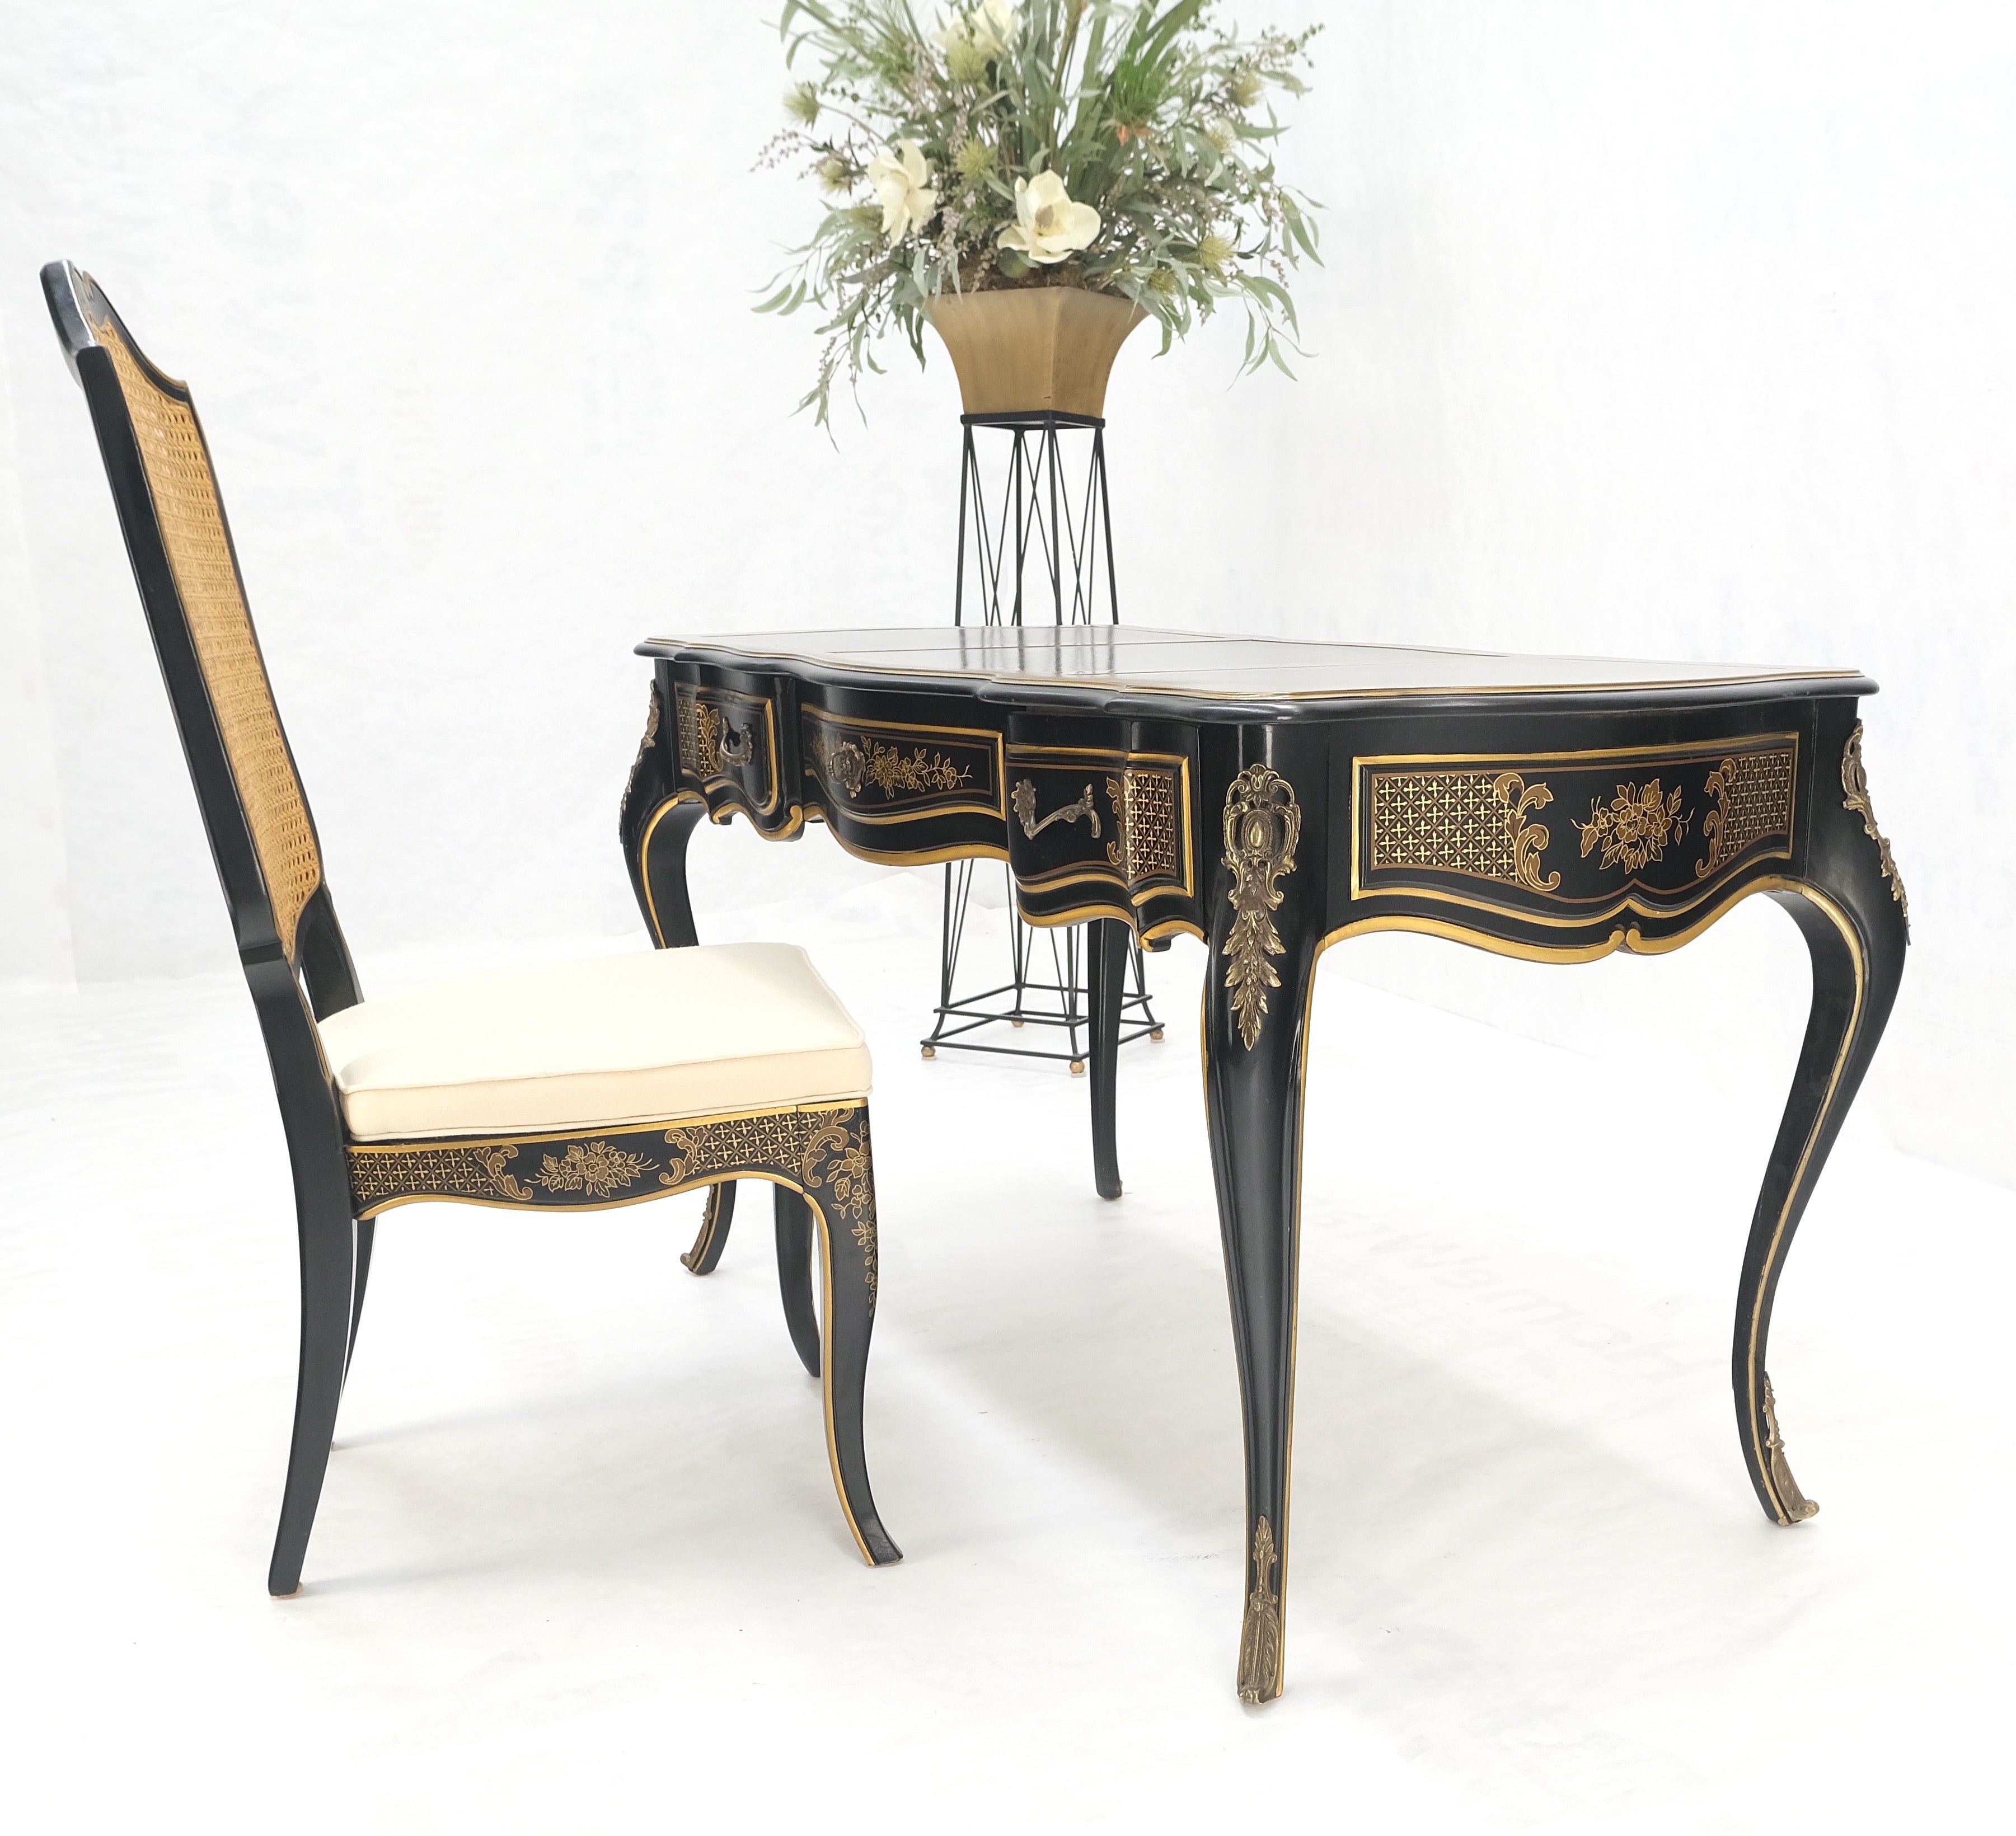 Chinoiserie Black Lacquer Gold Leather Bronze Burl Desk w/ Matching Chair MINT!
table: 26x56x30
chair: 21 x19x42, seat: 18